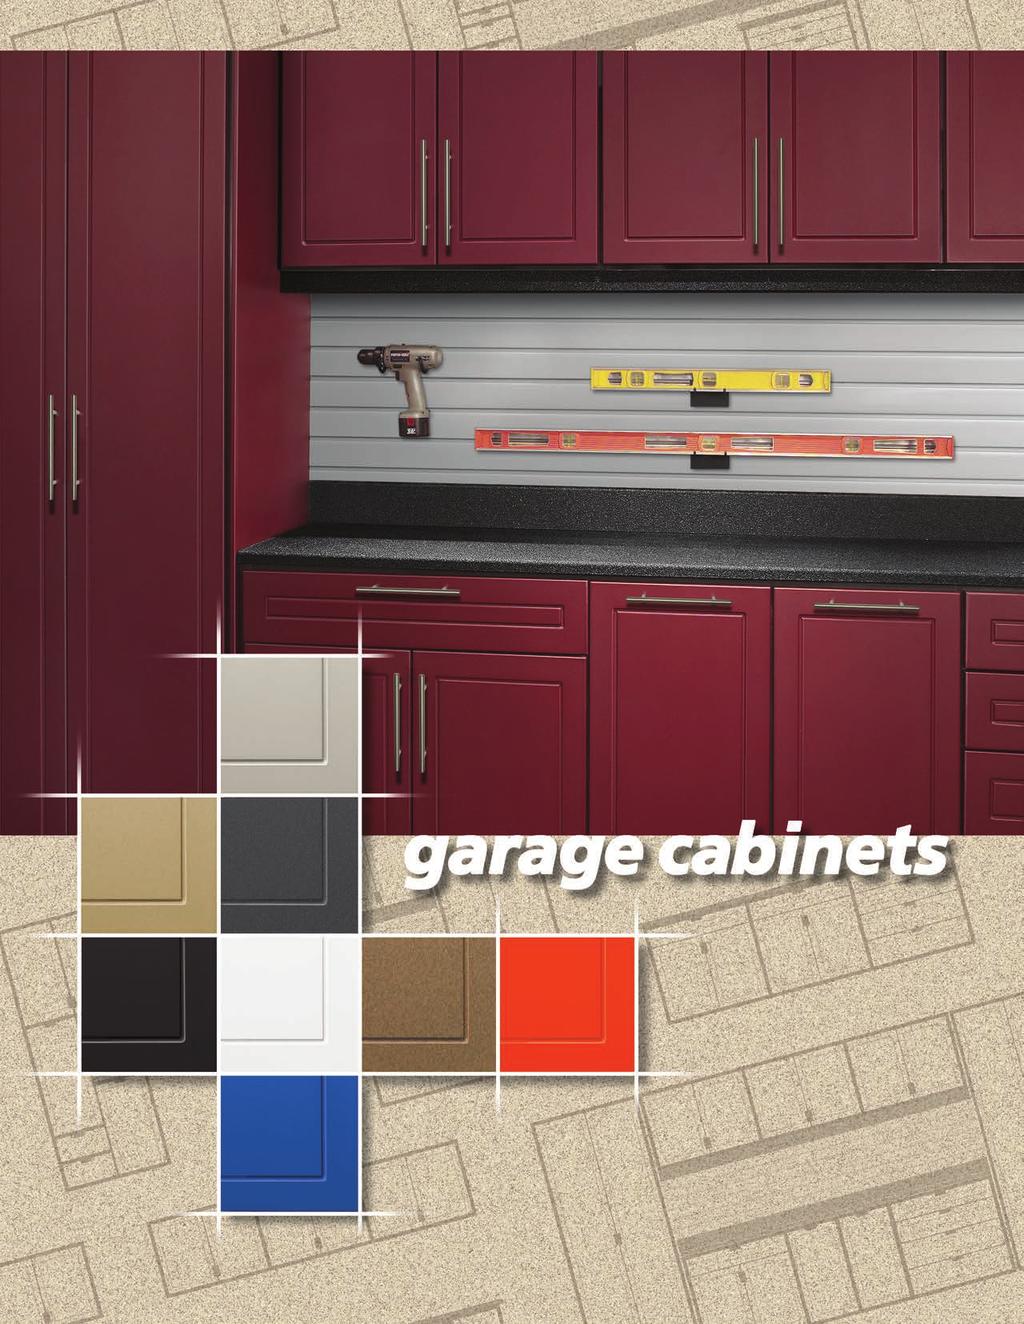 Built for the garage environment Powder-coated exterior surfaces